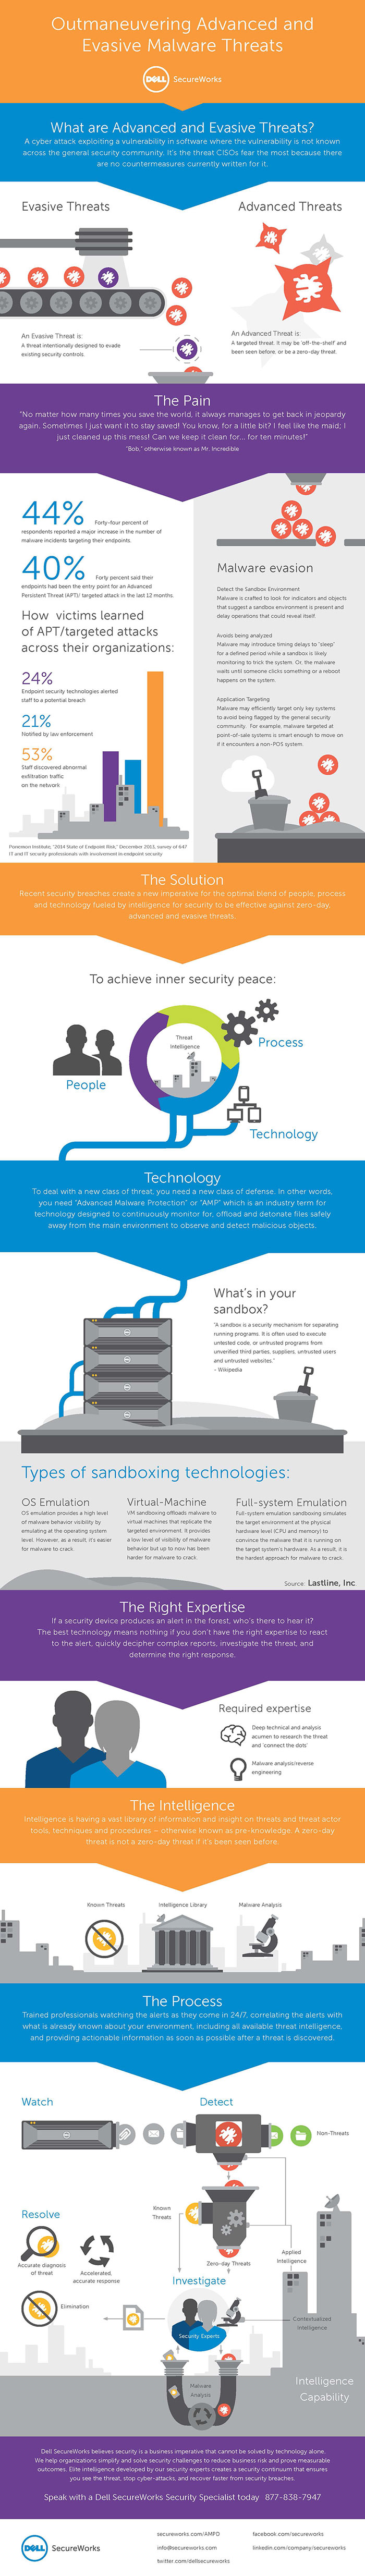 Outmaneuvering Advanced and Evasive Malware Threats Infographic